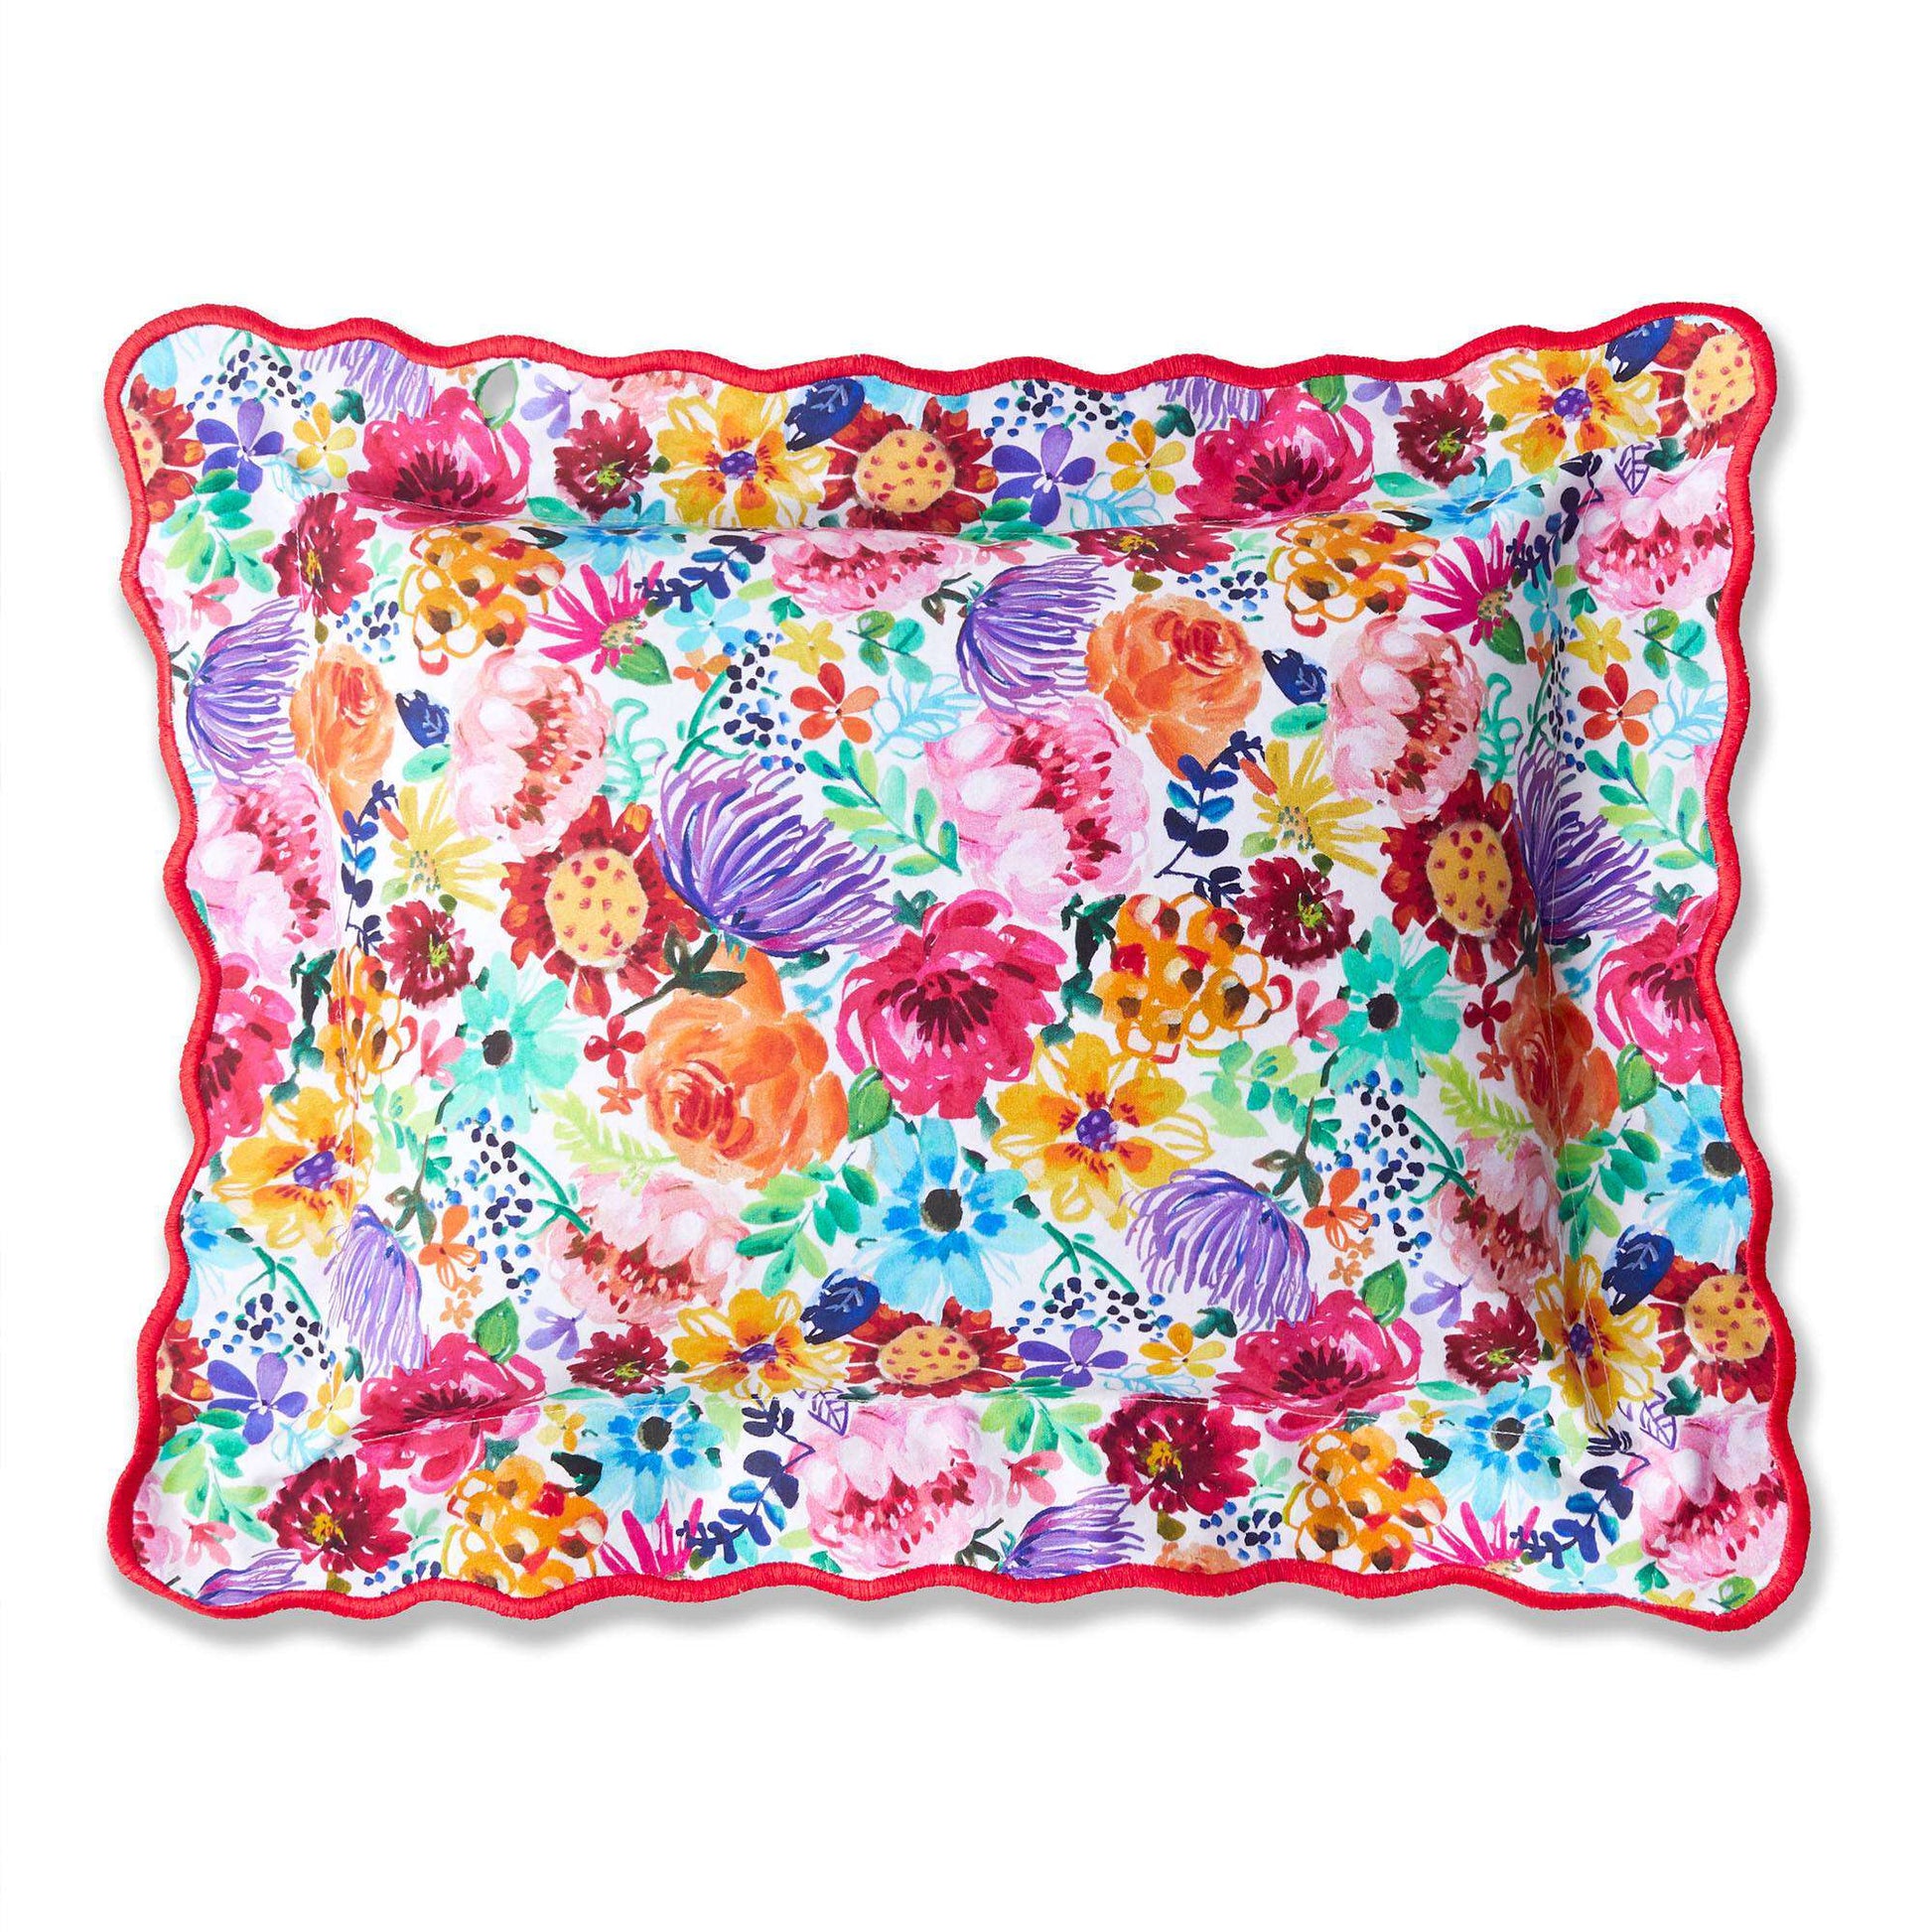 Free Coats & Clark Sewing Scalloped Edge Pillow Pattern